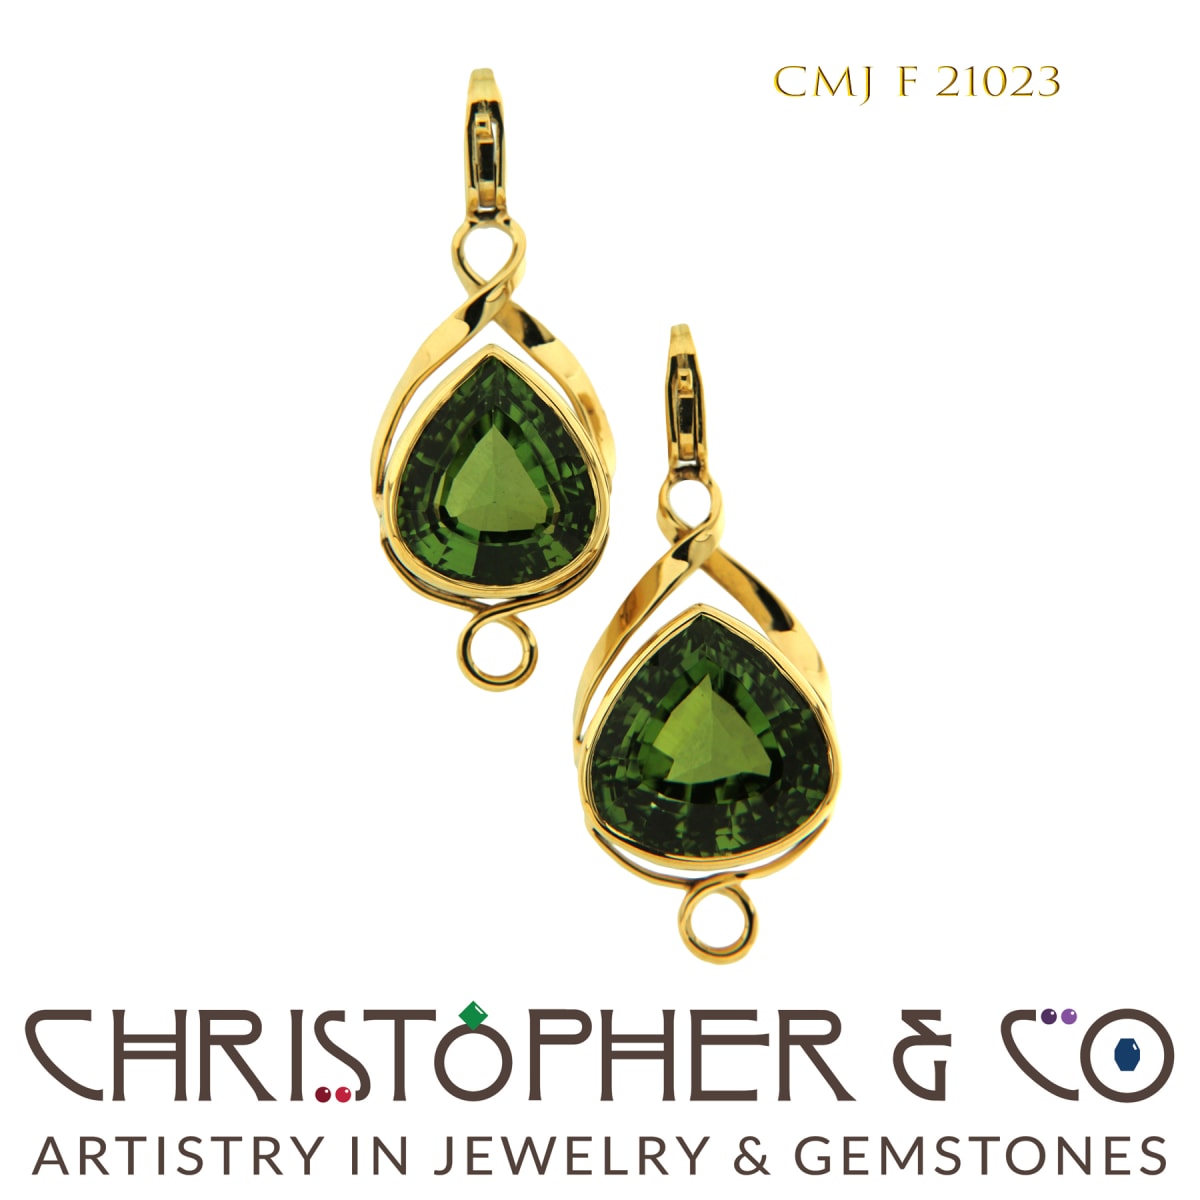 CMJ F 21023  Gold Elements by Christopher M. Jupp set with Tourmaline  Image: CMJ F 21023  Gold Elements by Christopher M. Jupp set with Tourmaline